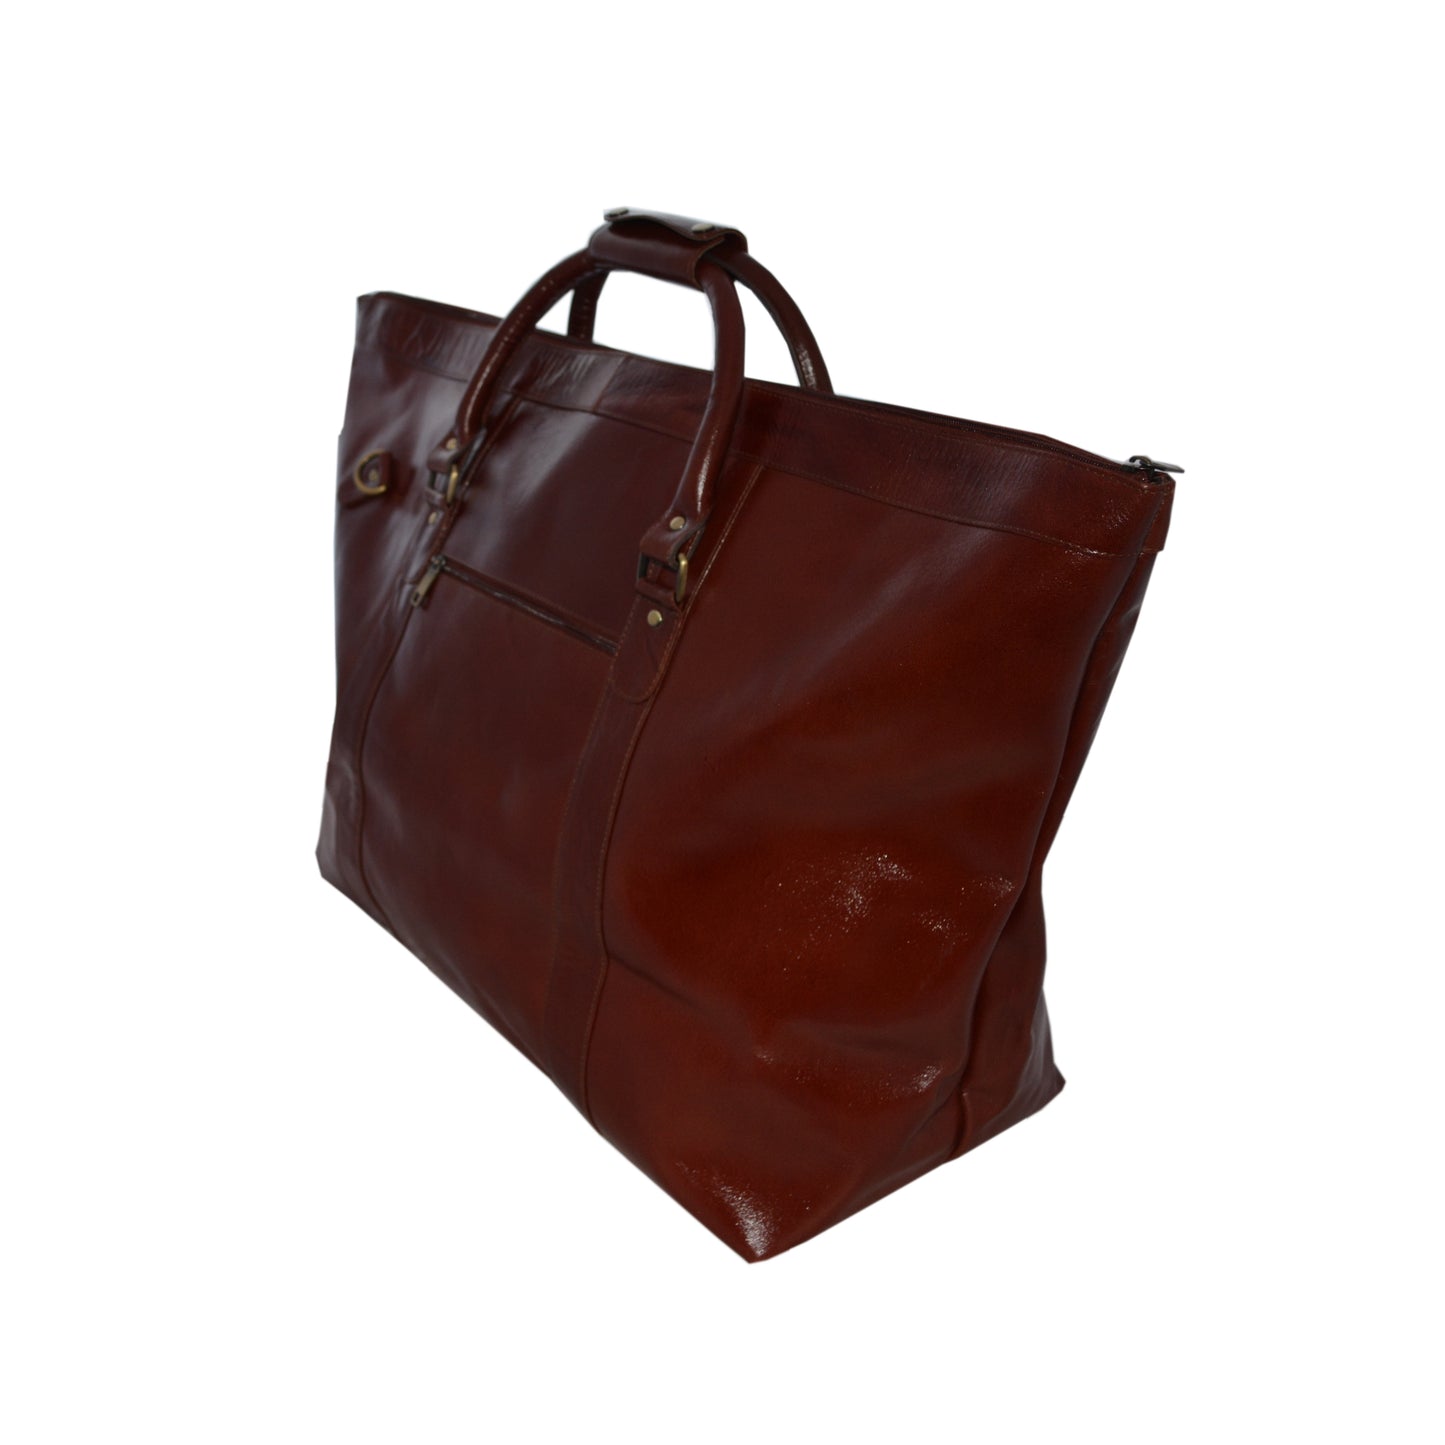 Alford – Luxury Leather Travel Bag / Holdall